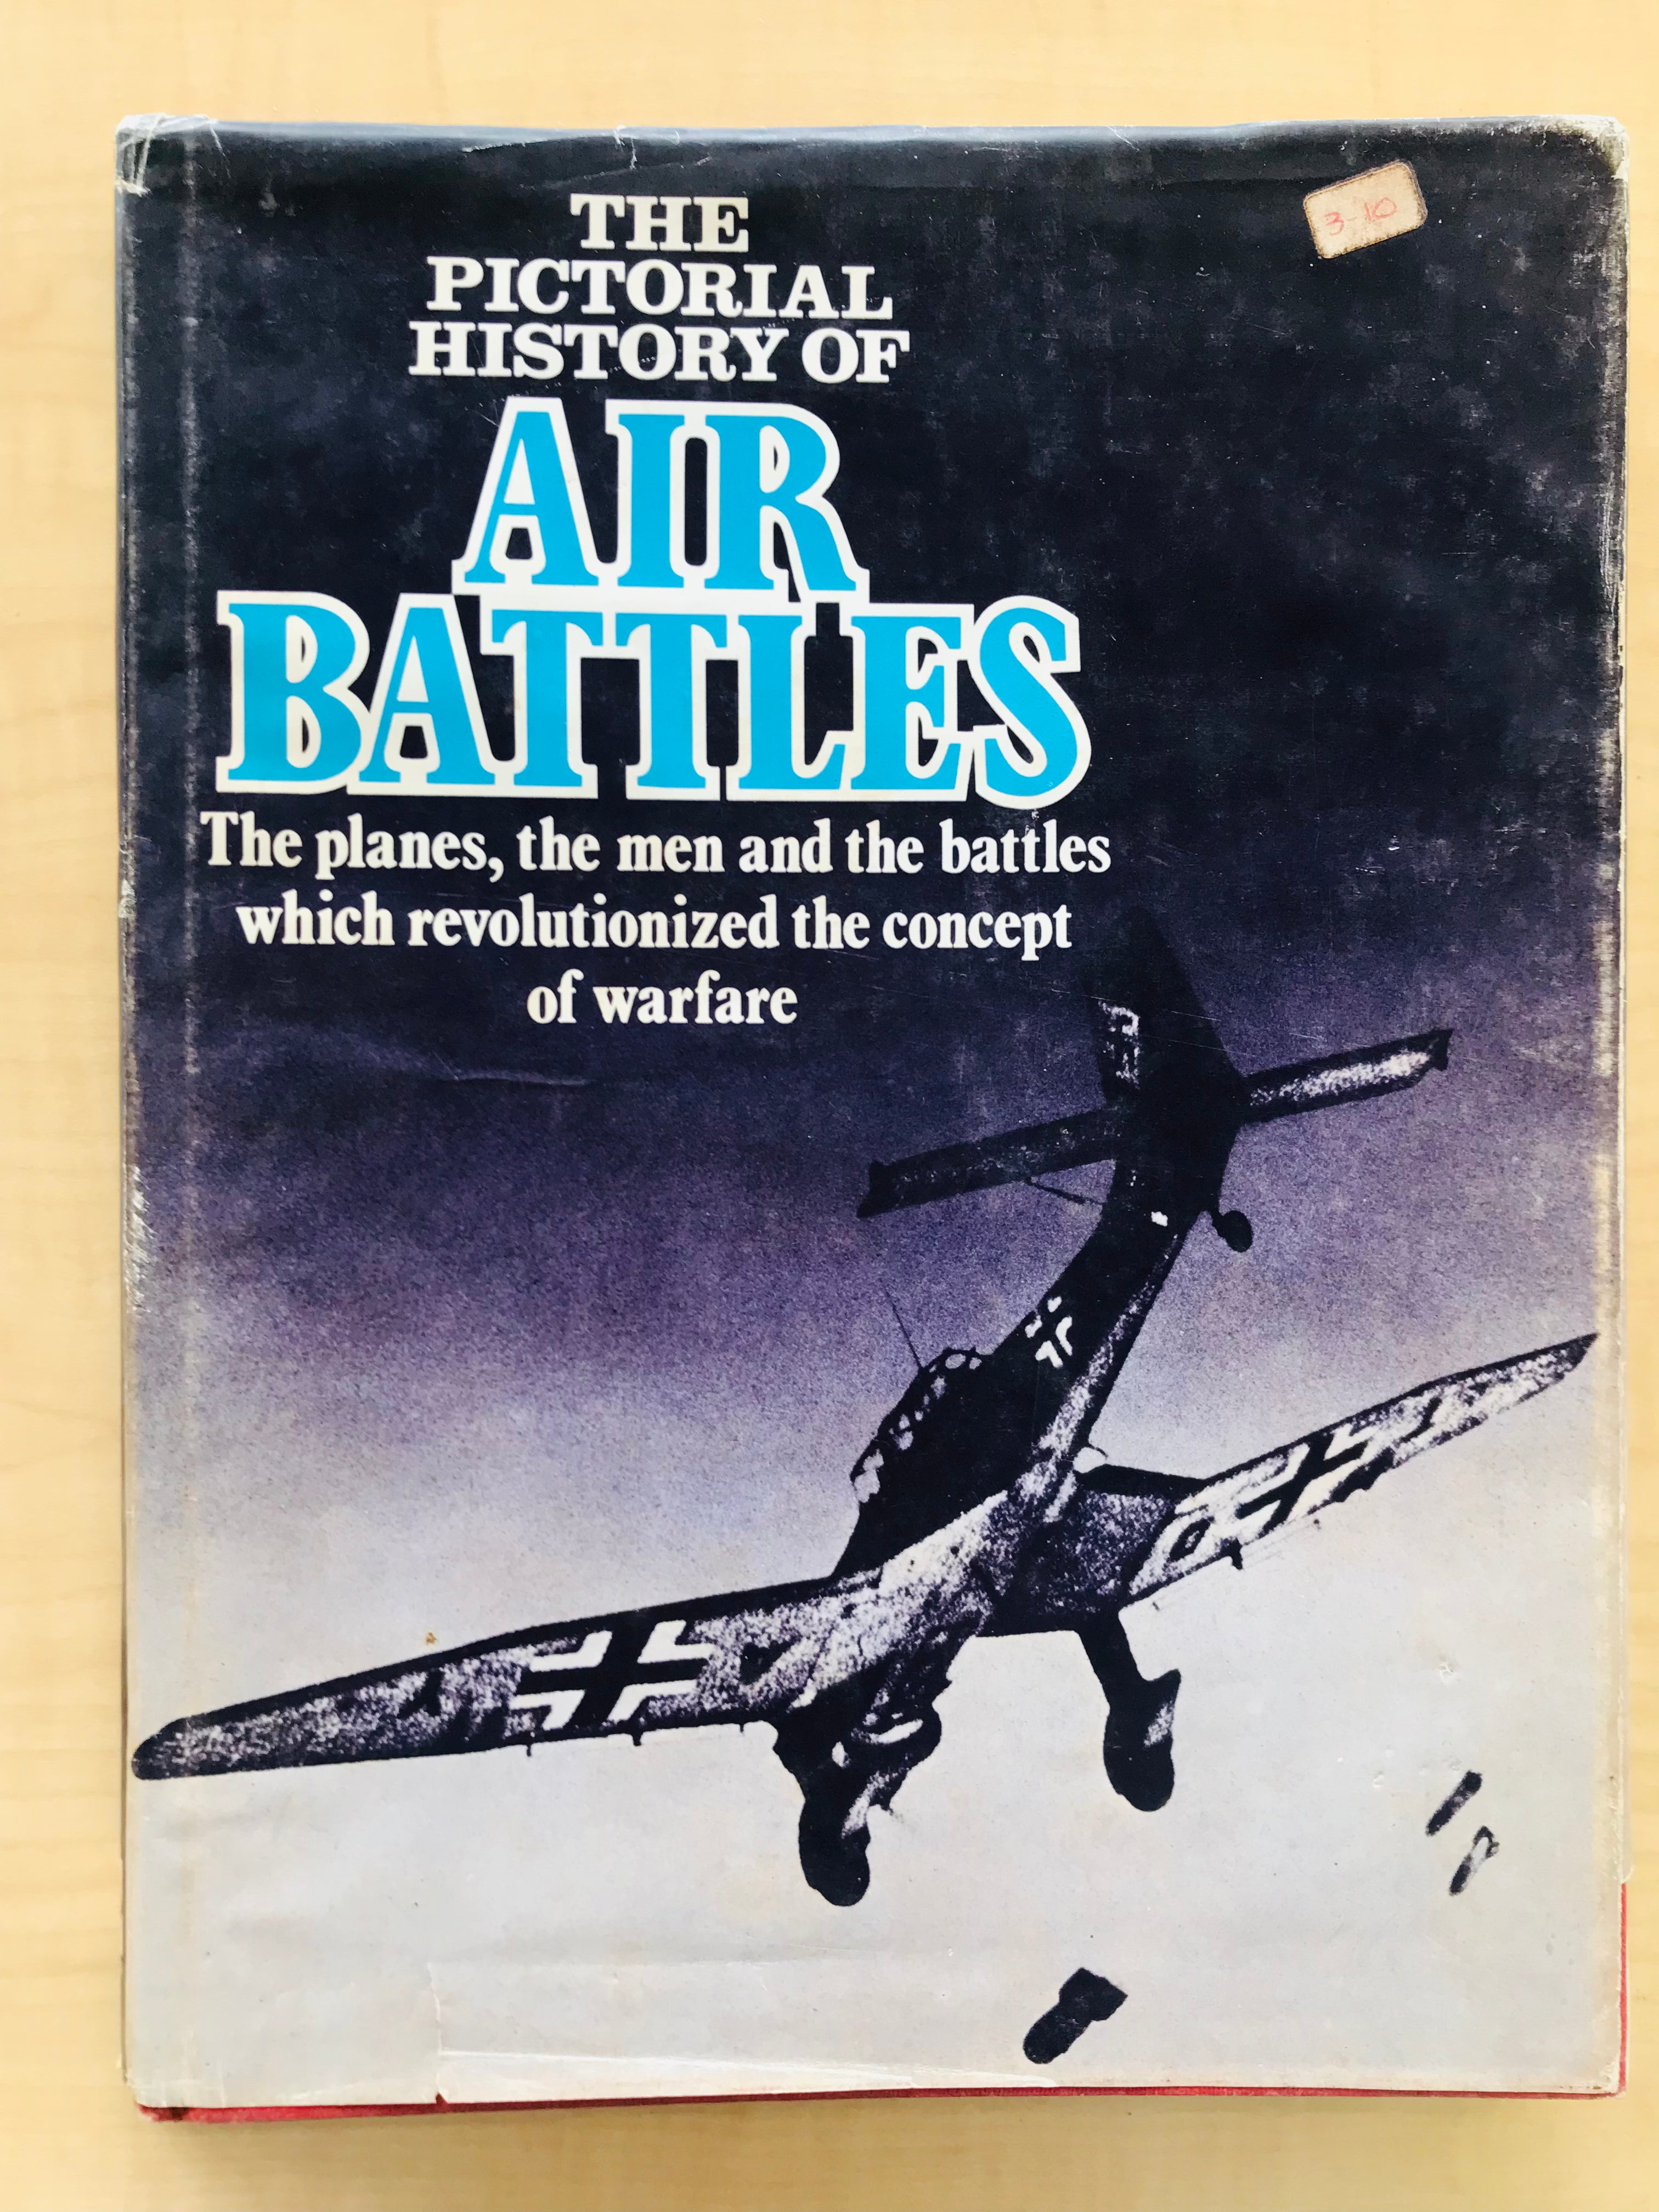 The Pictorial History of Air Battle